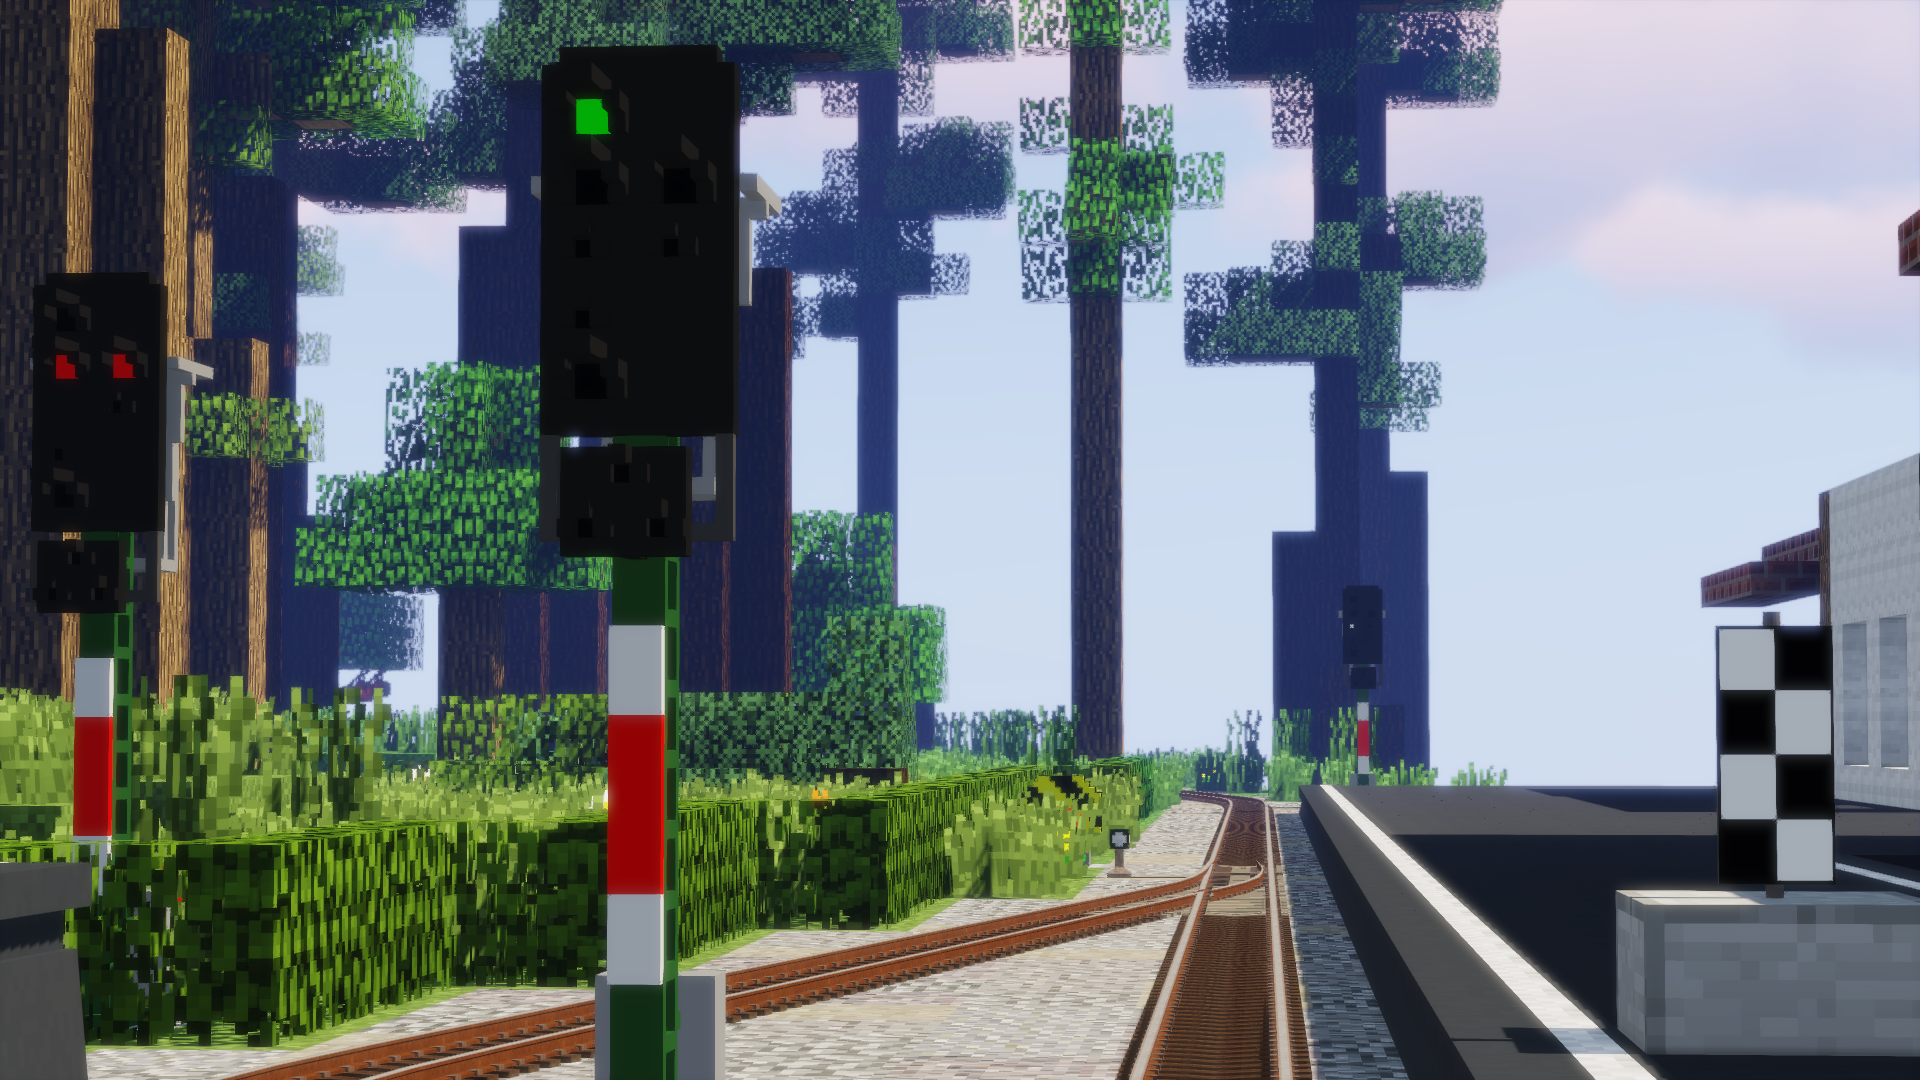 Small station with signals